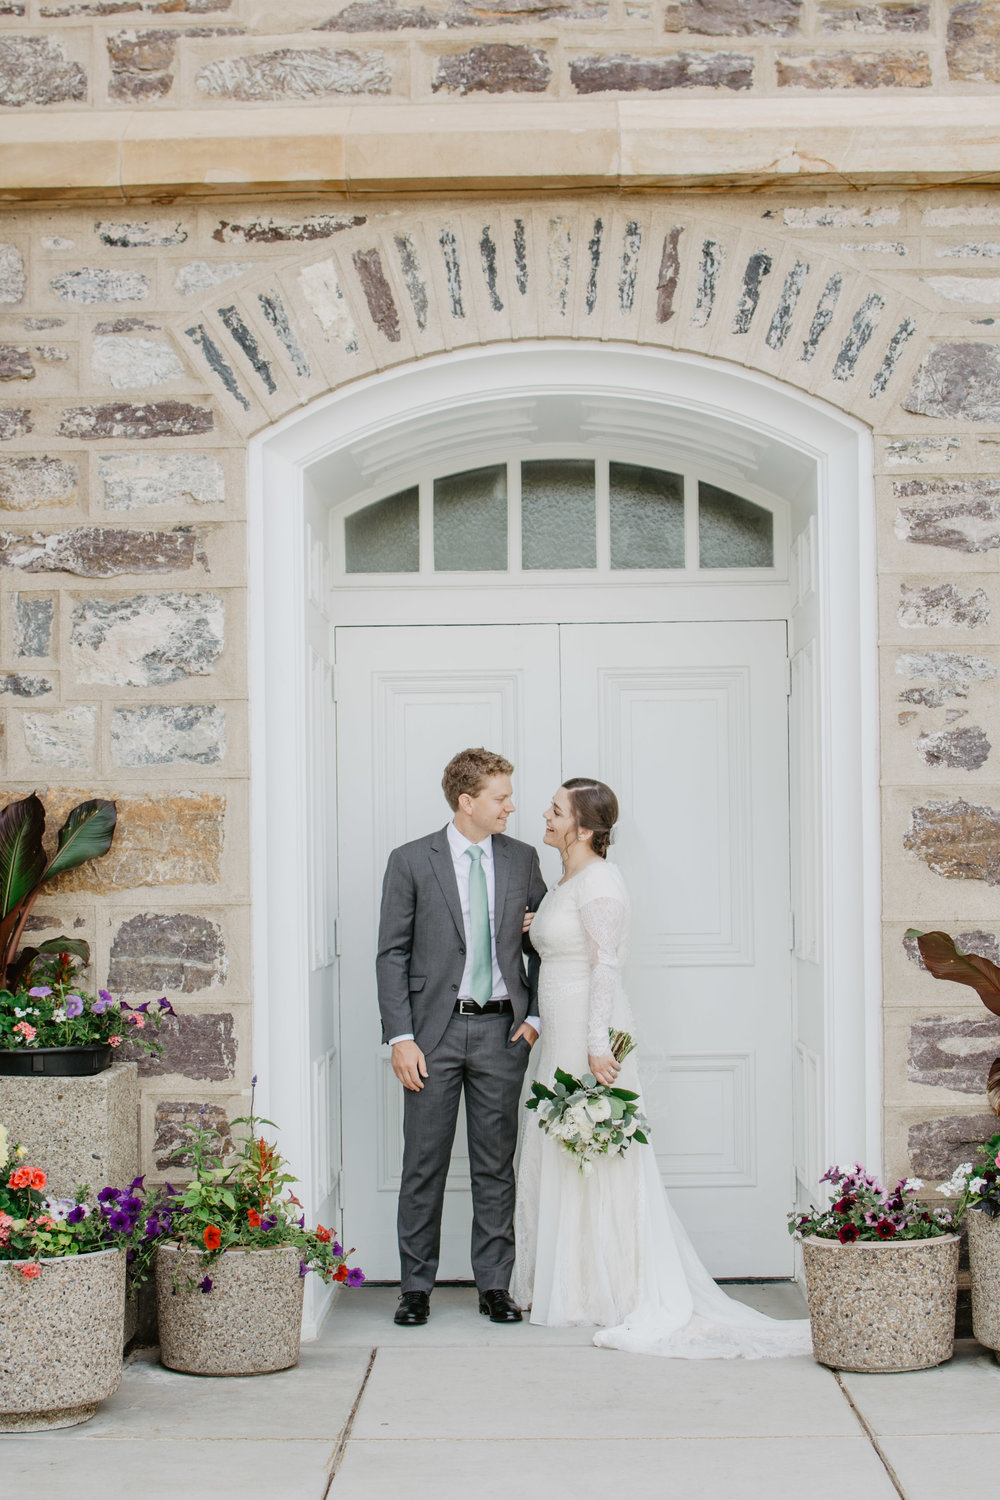 Jocilyn Bennett Photography | Utah Bride | LDS Bride | Utah Wedding Photography | When Two Become One | LDS civil wedding ceremony | Blending religions in families | Capturing Raw and Genuine Emotion | Combining Traditions | LDS Logan Temple | Temple Sealing | Bridals | Bride and Groom |